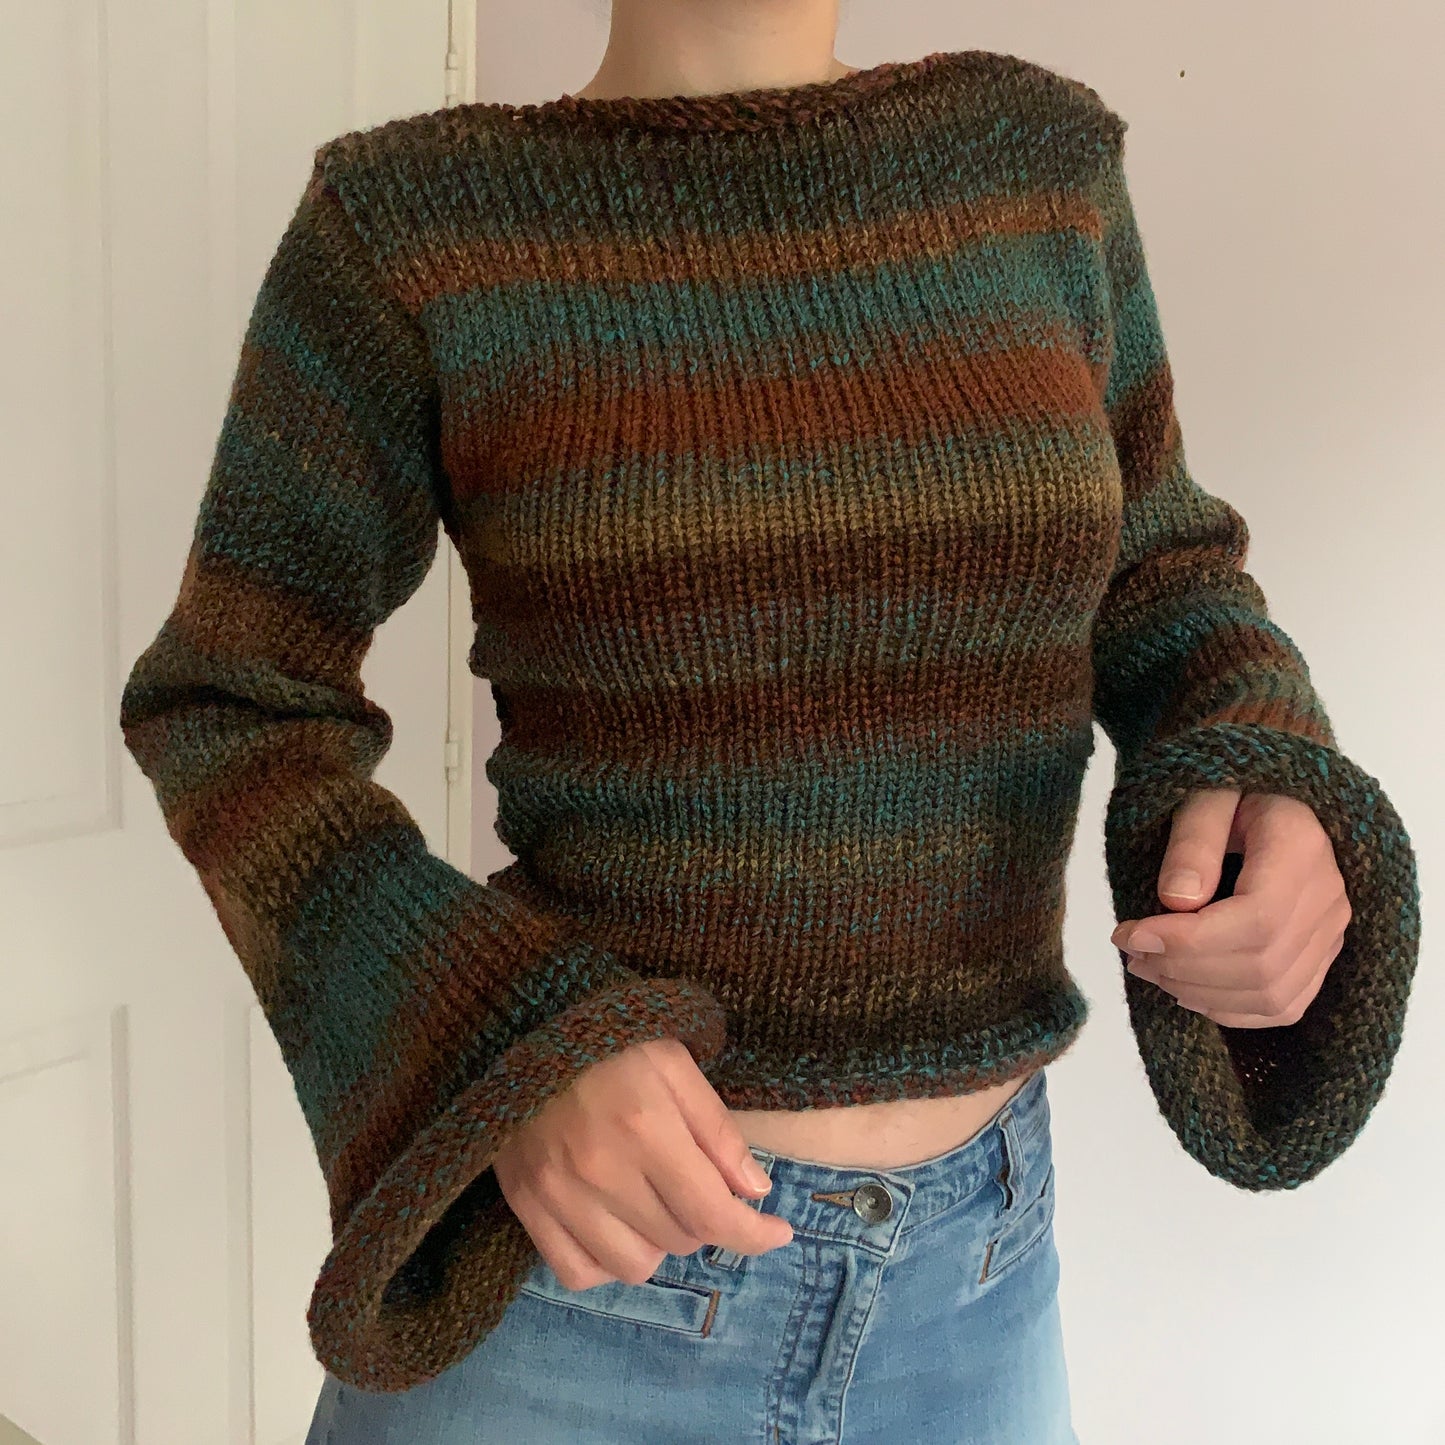 Handmade brown and blue ombré knitted jumper